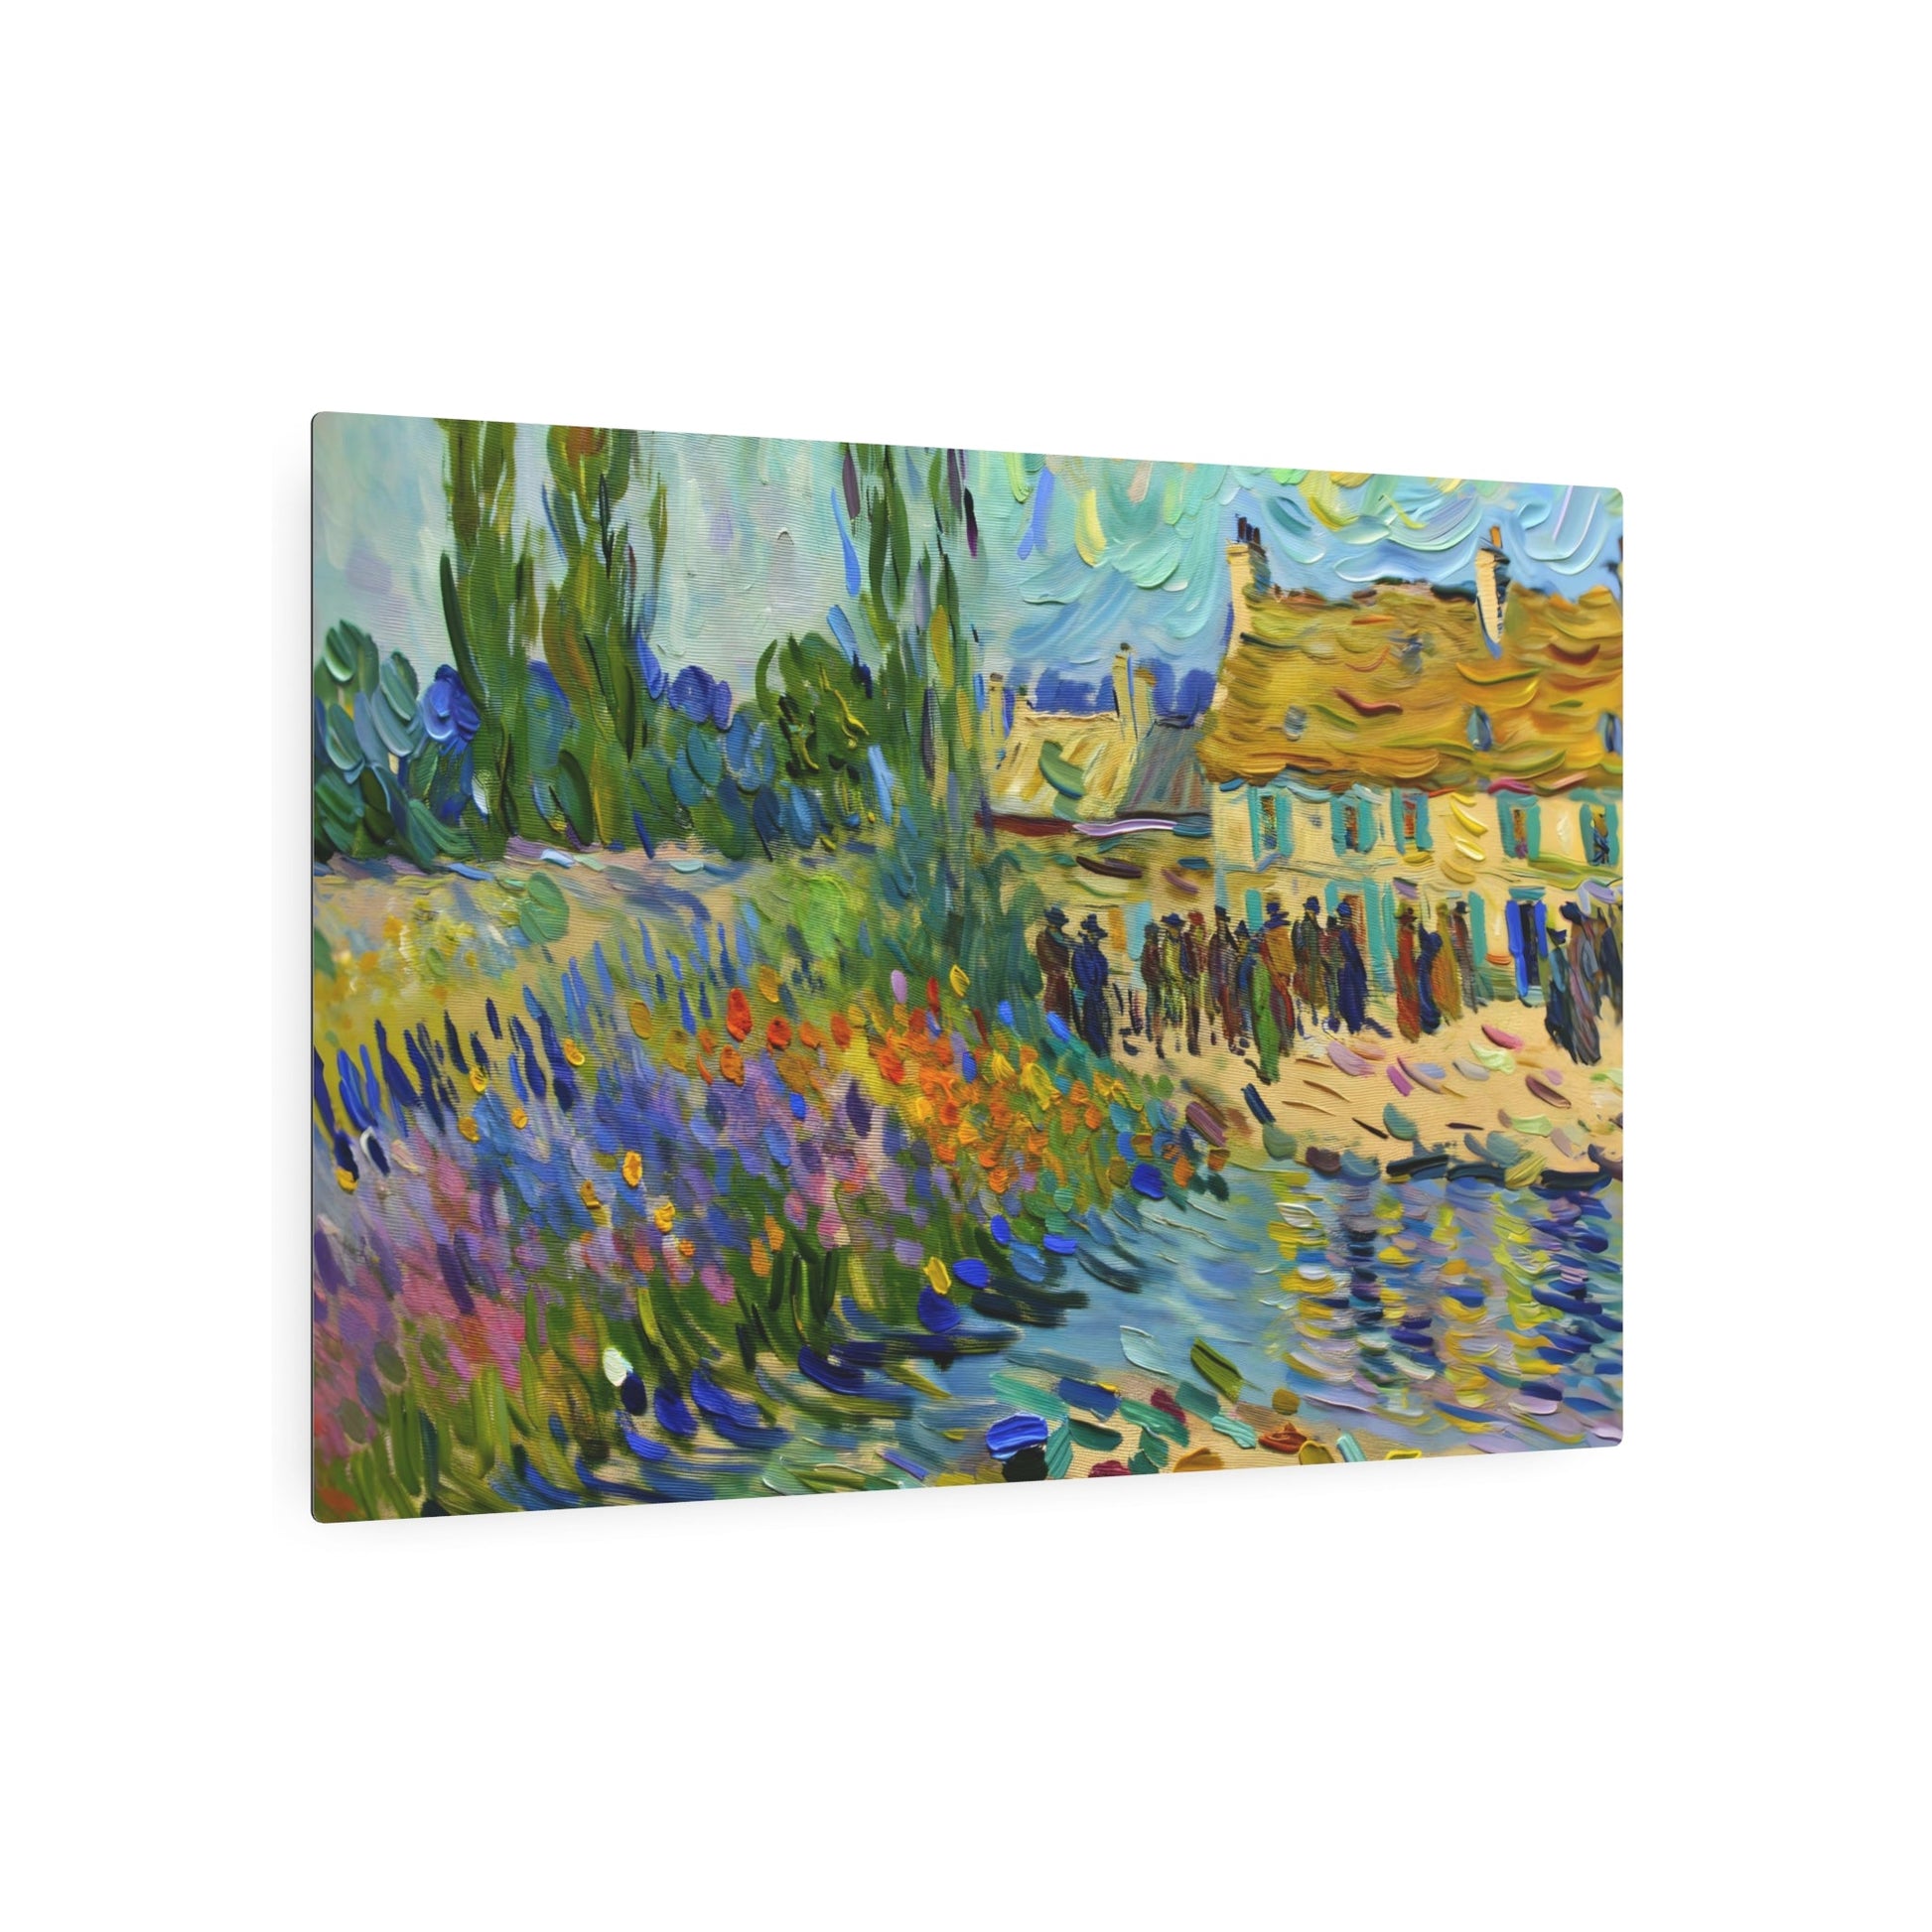 Metal Poster Art | "Post-Impressionism Style Painting: Vivid Colors, Distinctive Brushstrokes Depicting Ordinary Life - Western Art Styles Collection" - Metal Poster Art 36″ x 24″ (Horizontal) 0.12''